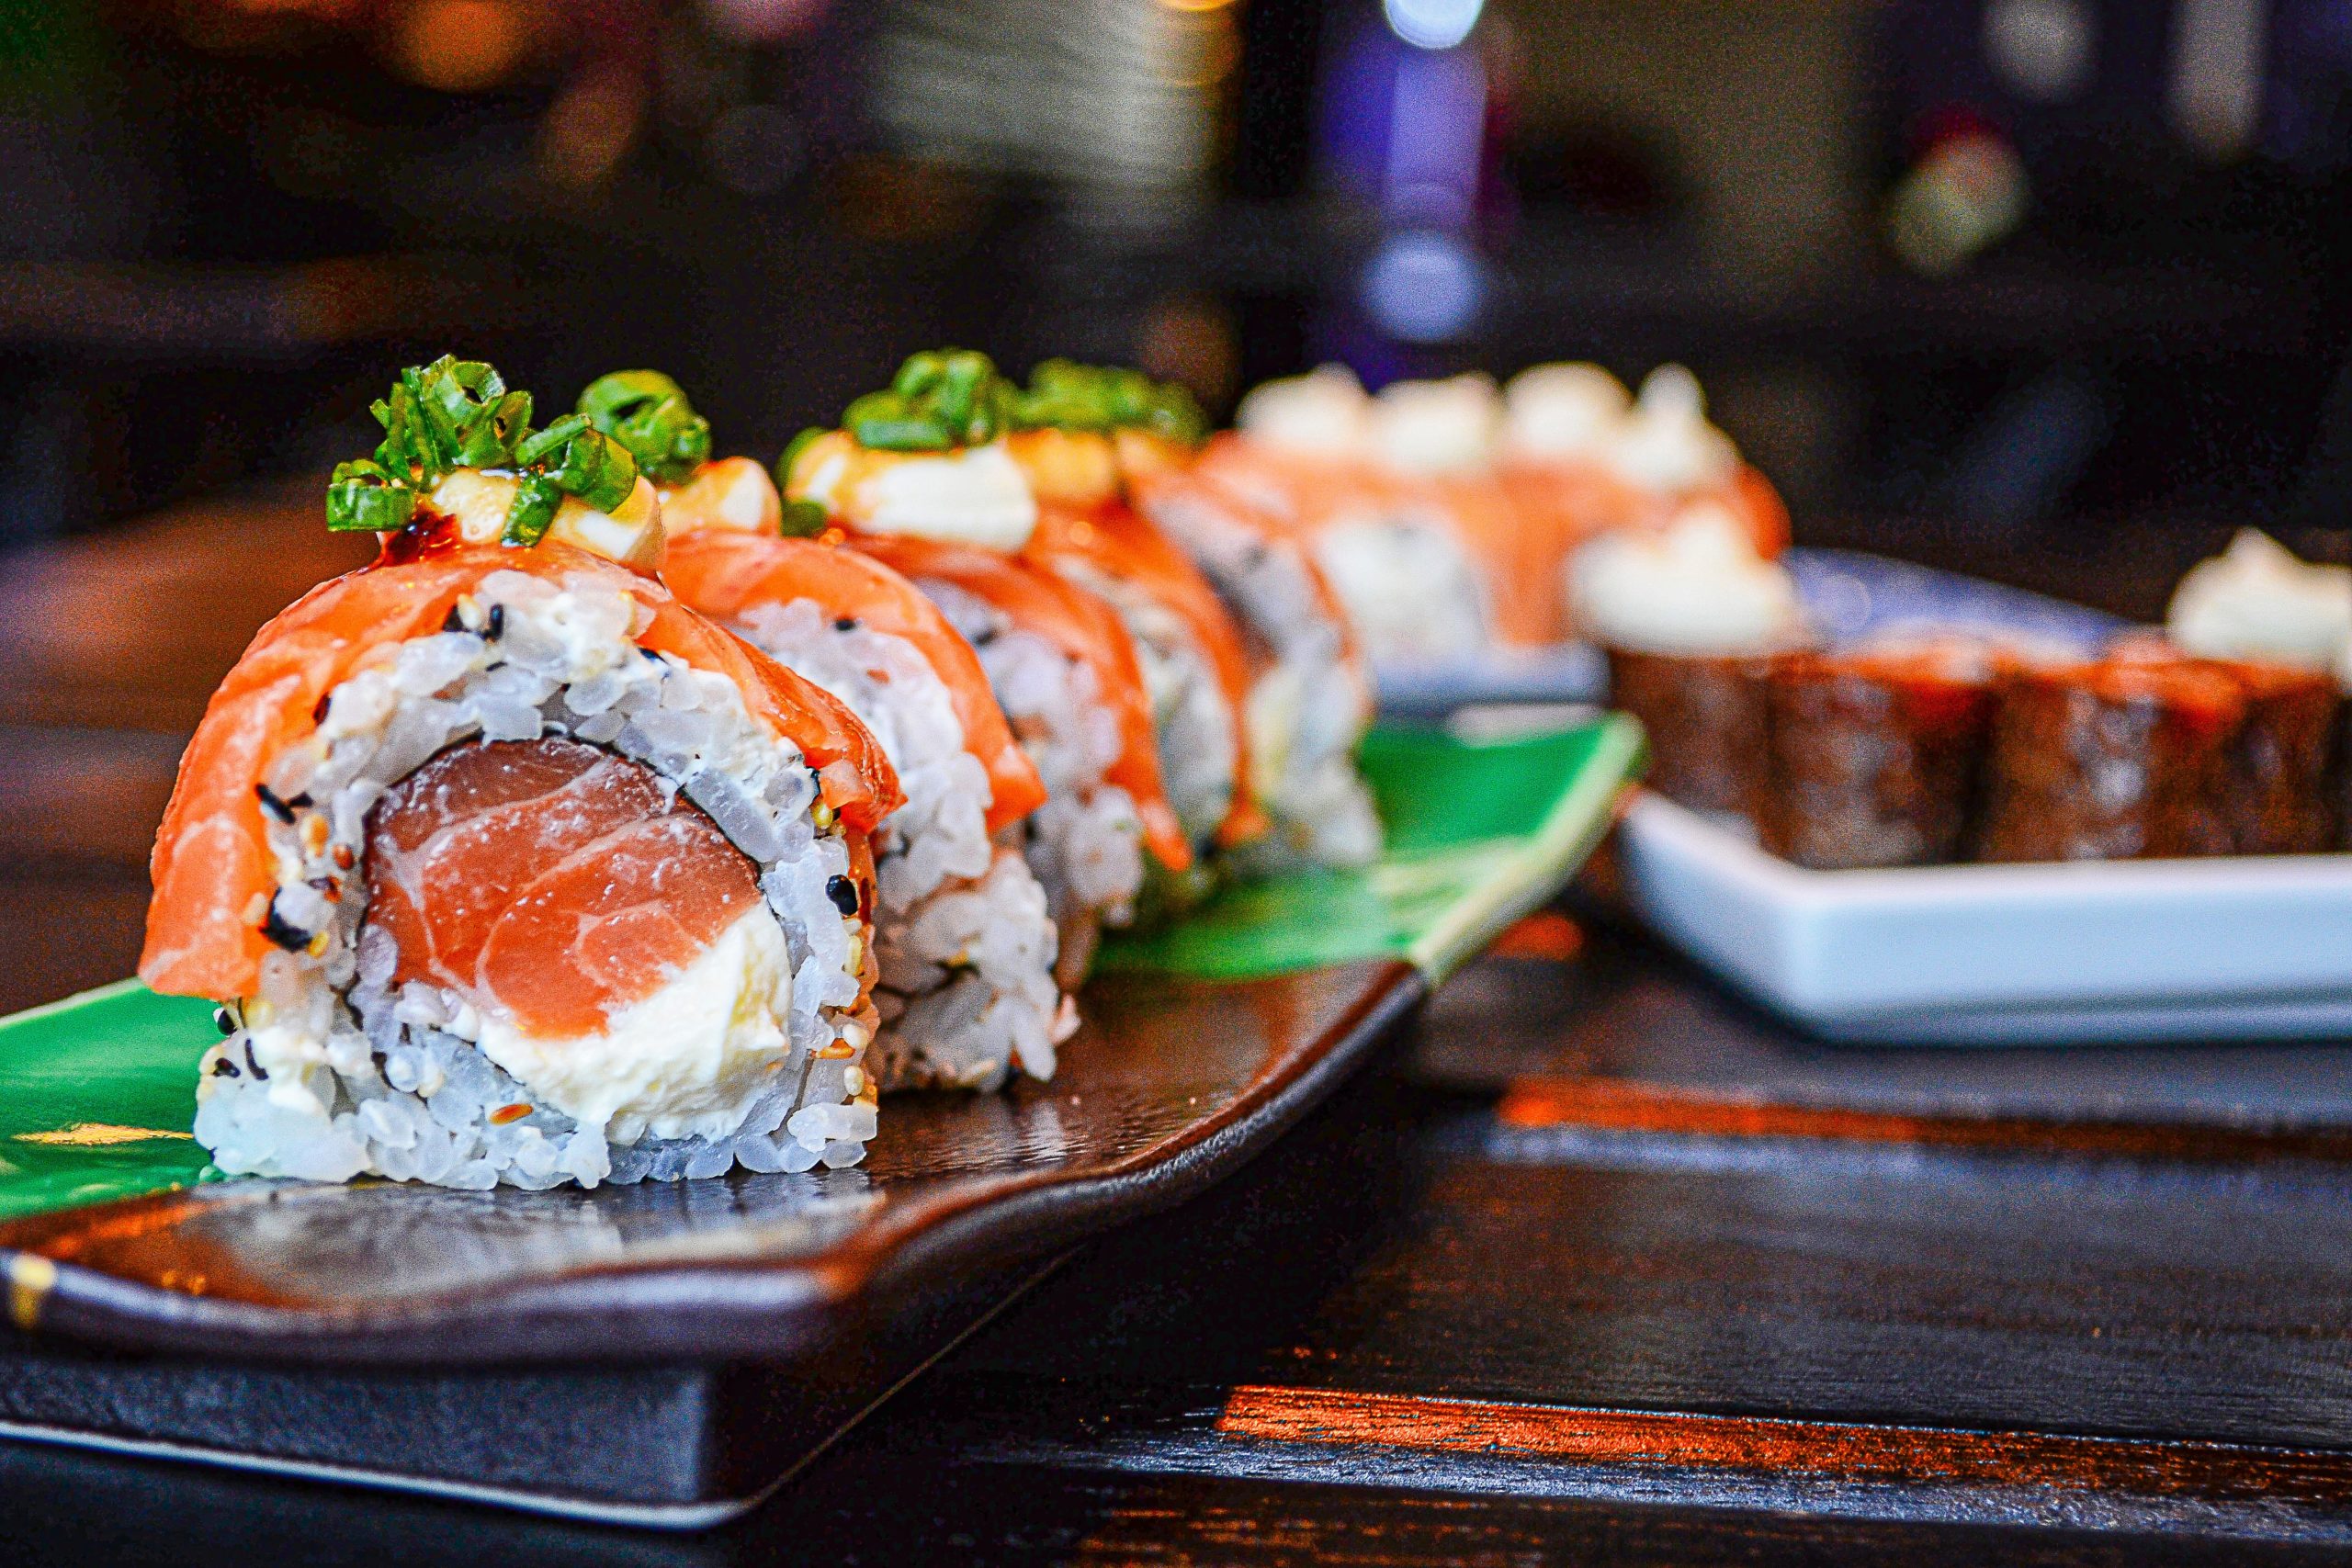 What Makes Sushi So Expensive?